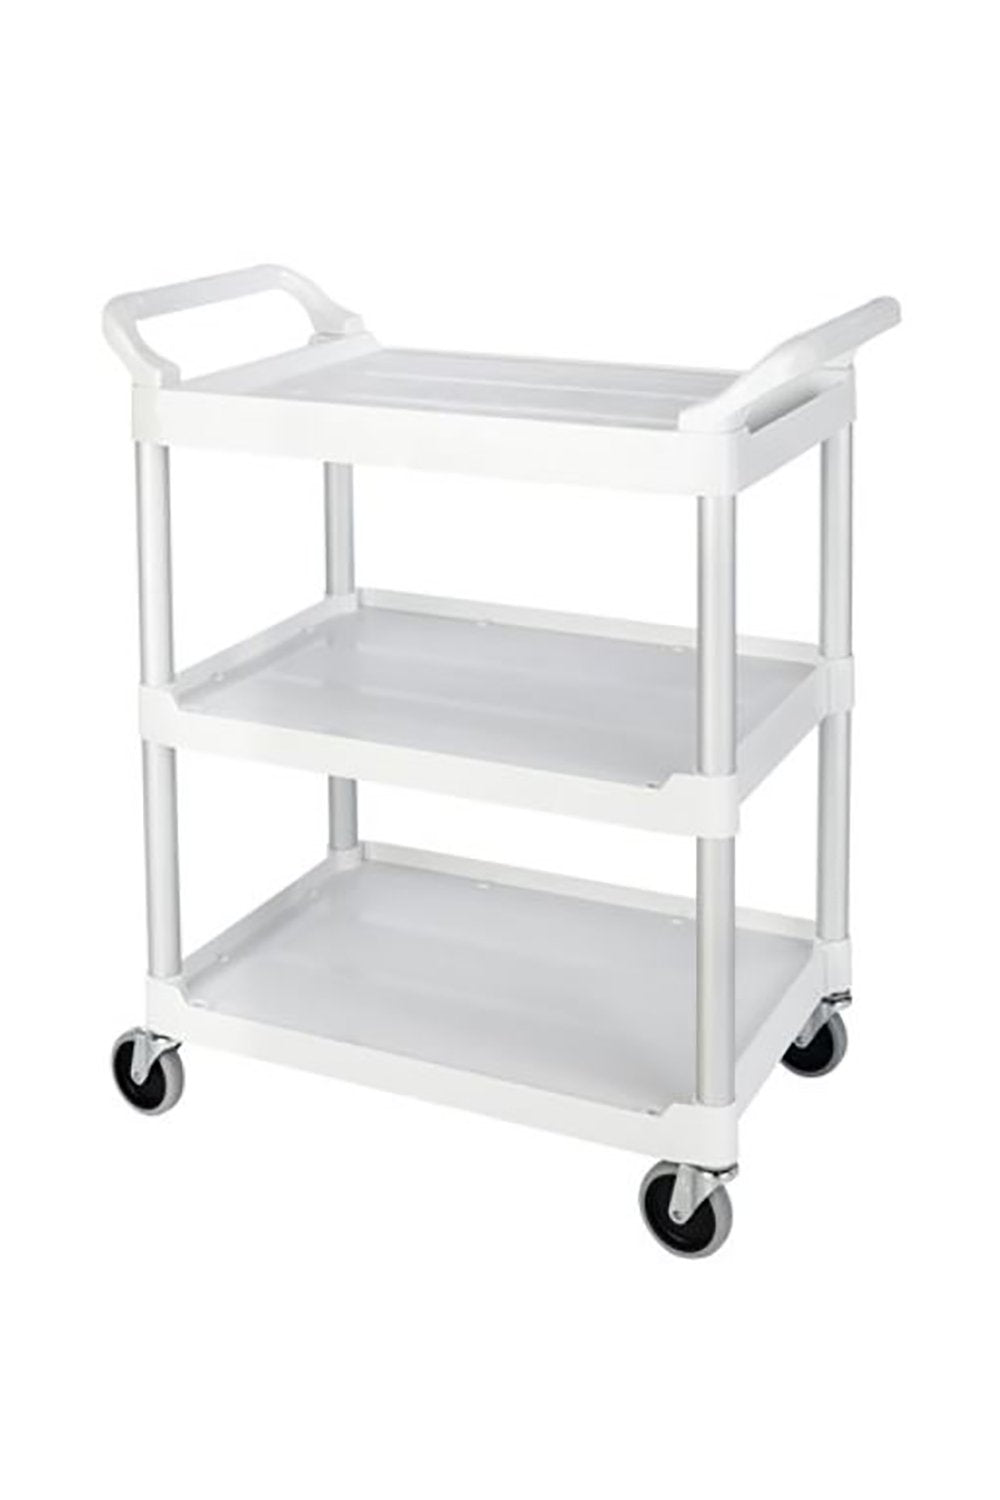 Service Cart Transport & Utility Carts Rubbermaid 18.63"D x 33.63"W x 37.75"H Open Ends Off White